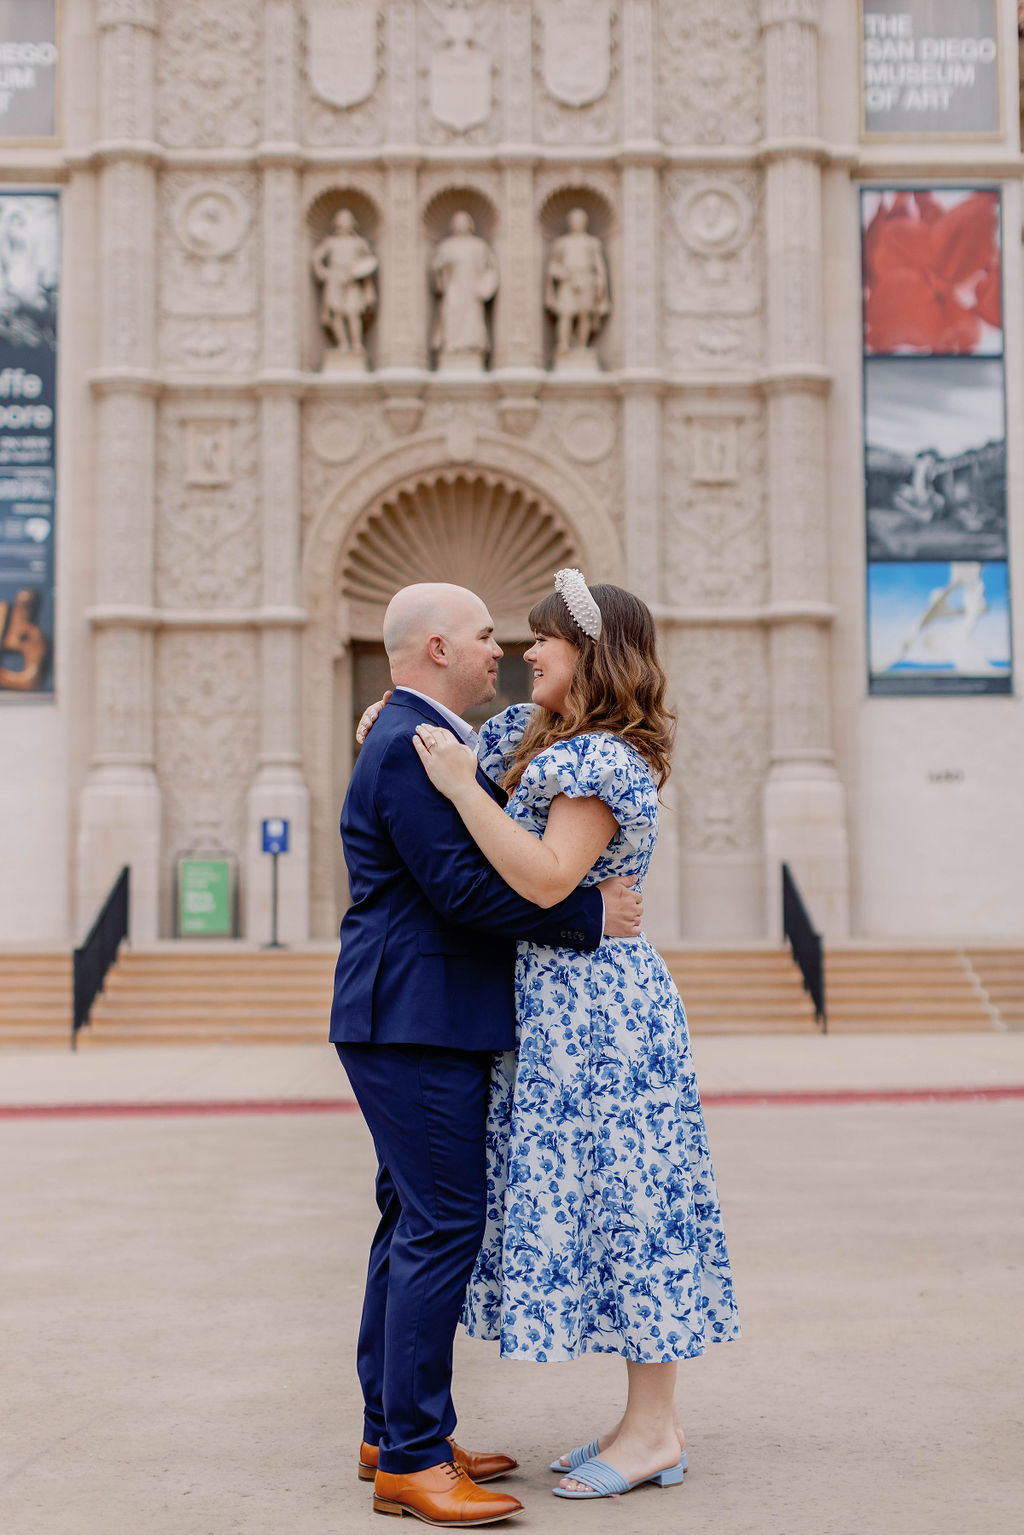 Engagement photo of Jimmy and Hannah  dancing and embracing outside  at San Diego Museum of art. |Photo by California Photographer Sarah Block Photography